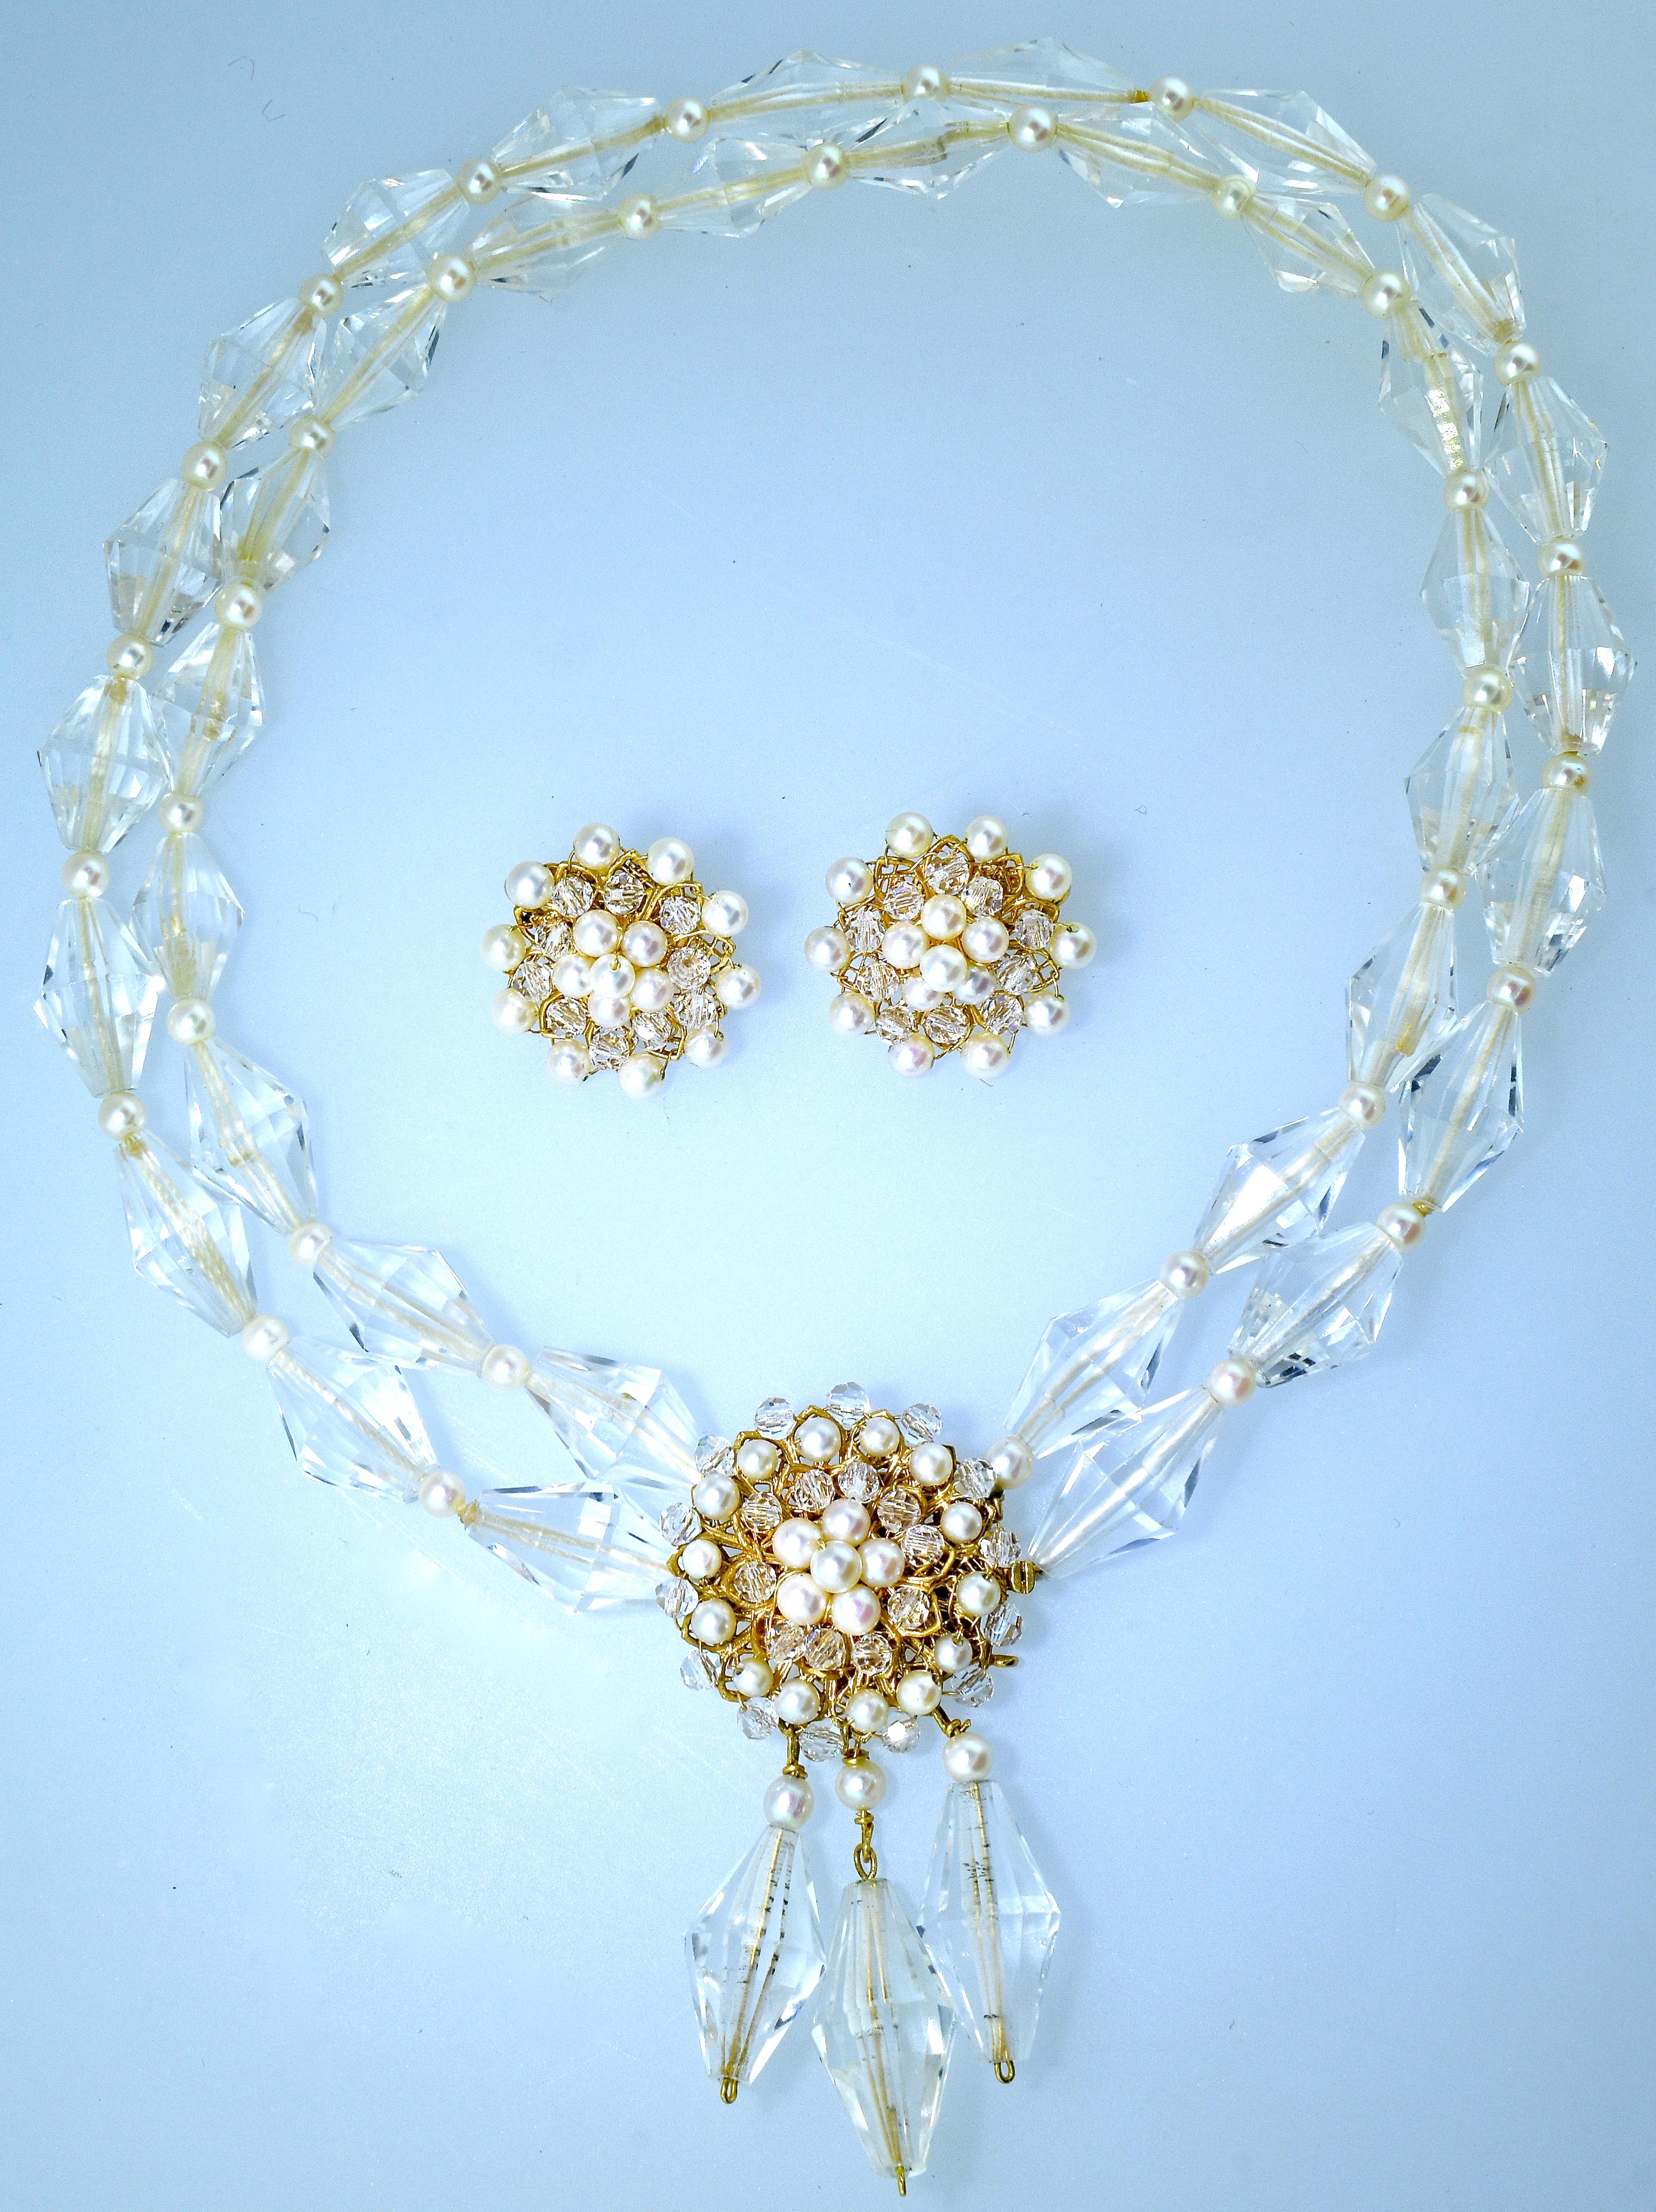 Women's or Men's Necklace and Earrings Set of Pearls, Gold and Rock Crystal, circa 1960